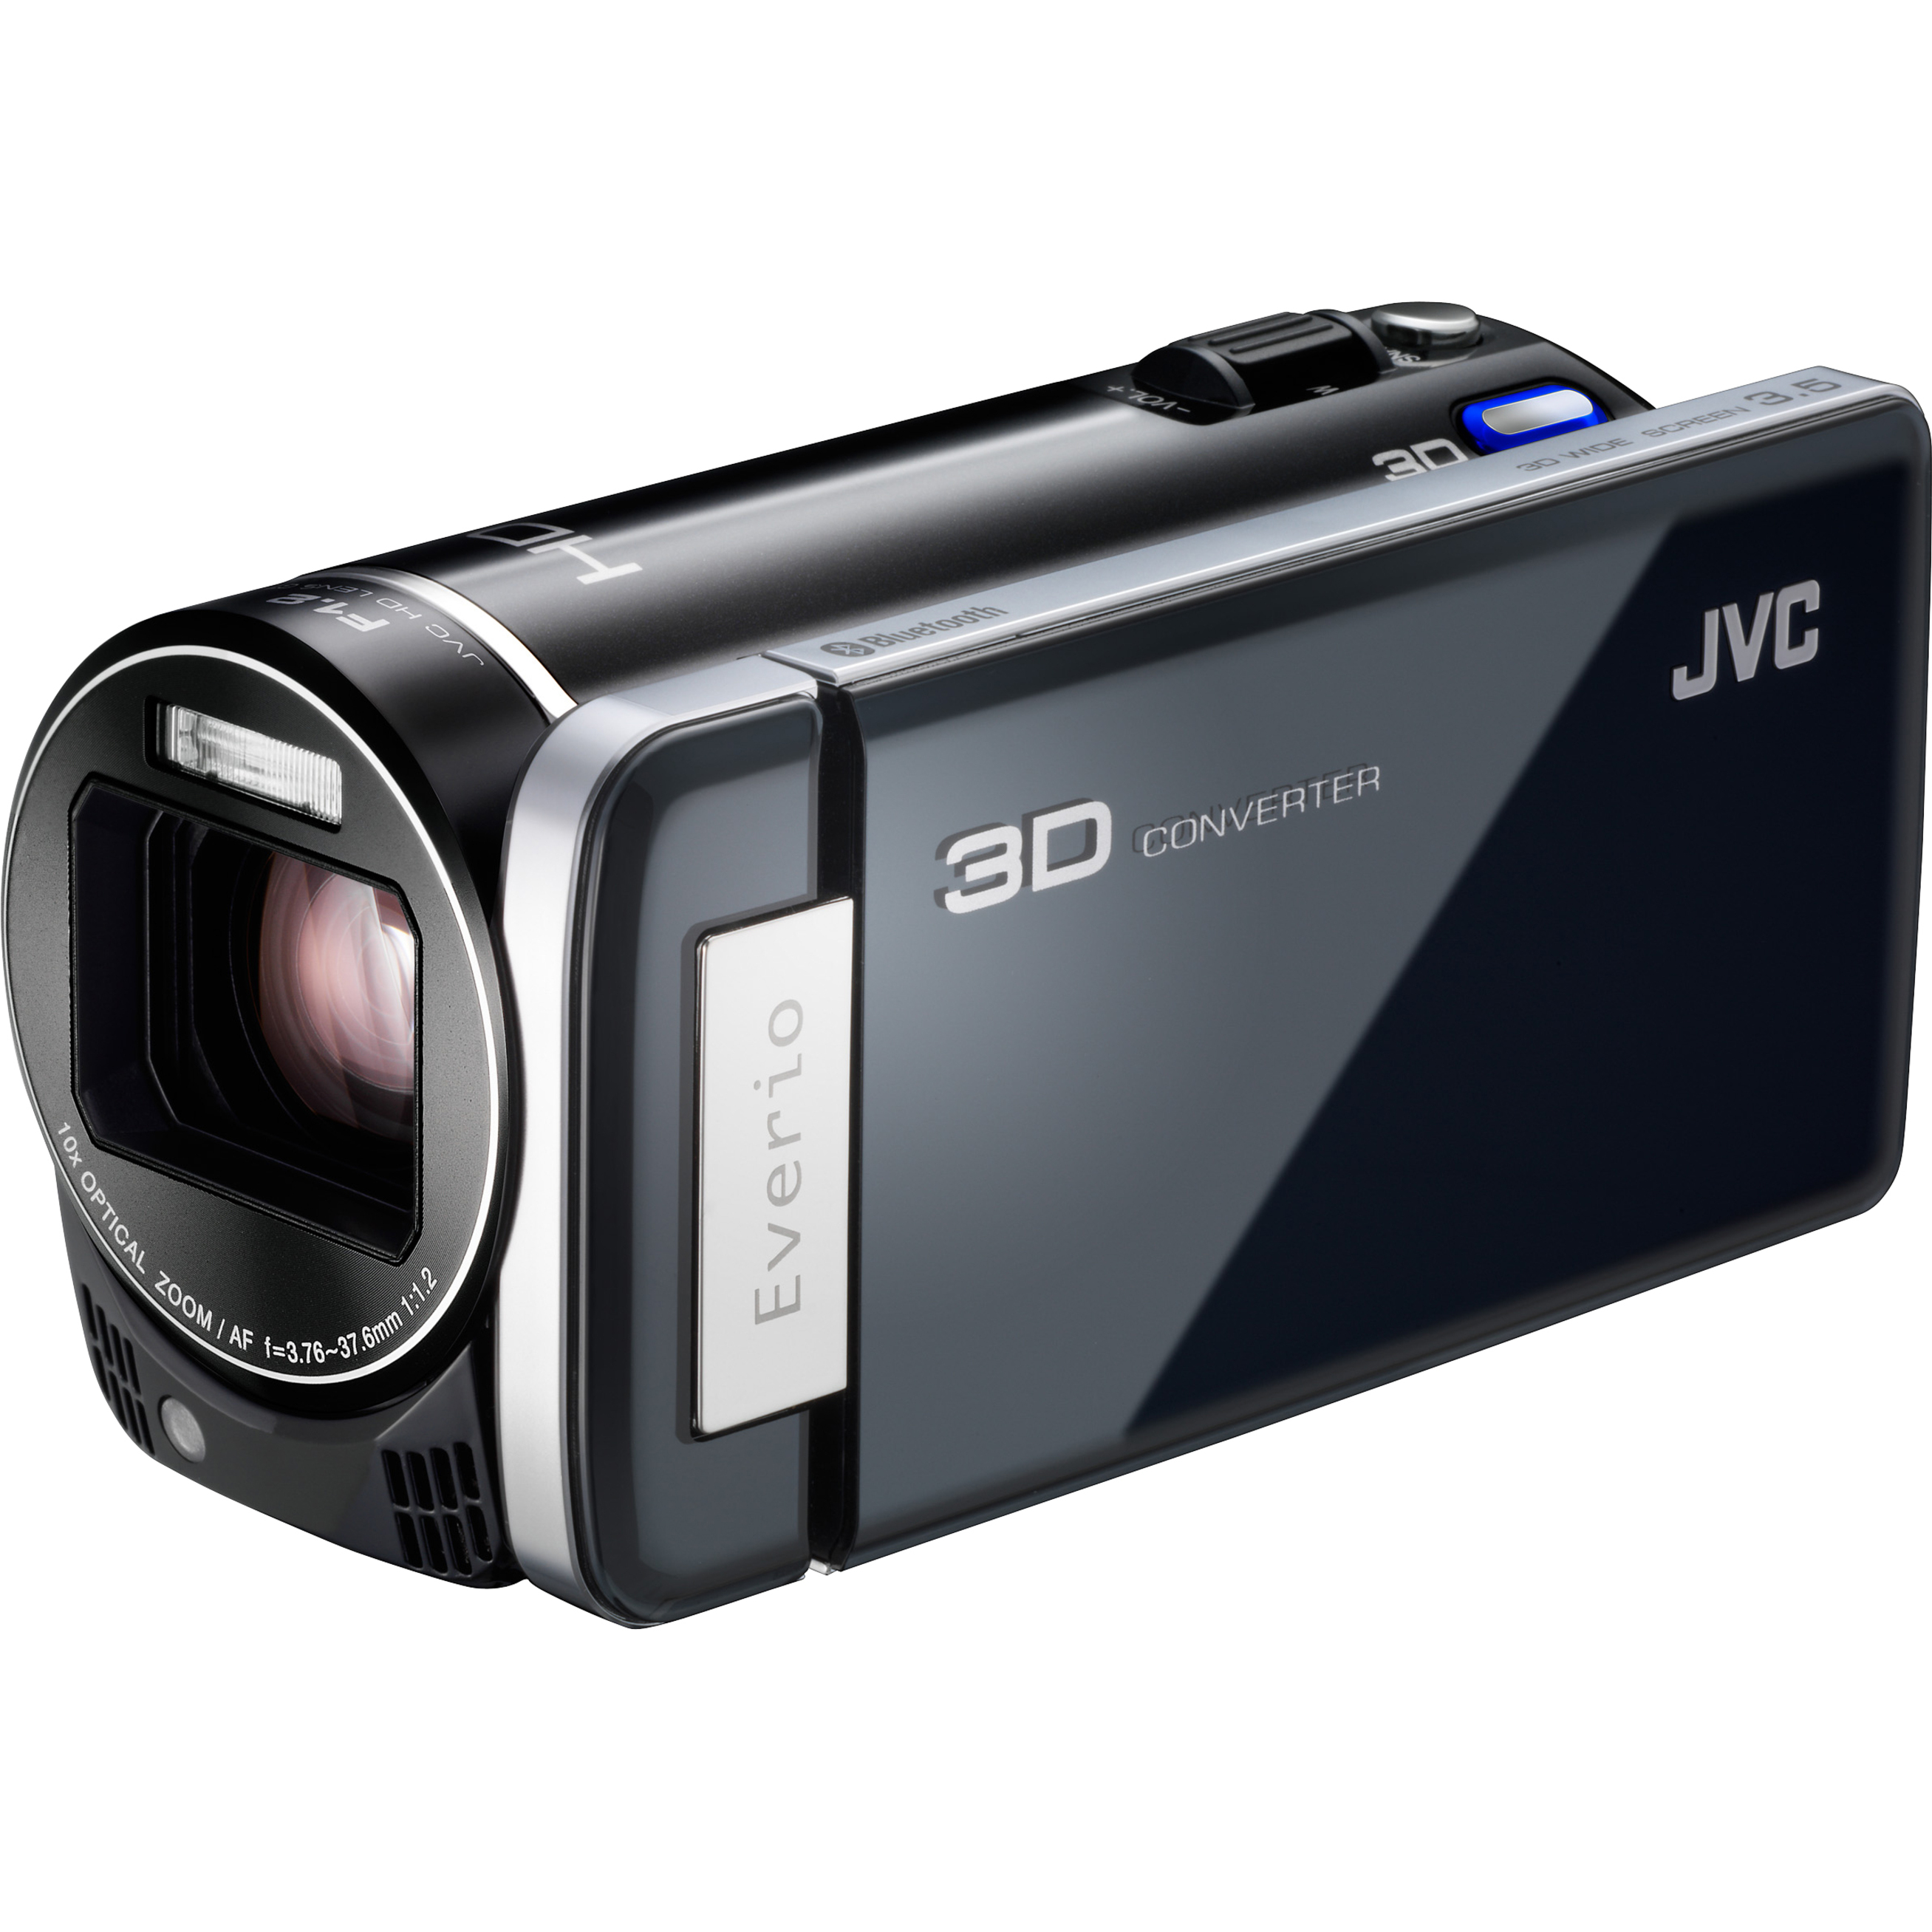 JVC Everio GZ-HM960 Digital Camcorder, 3.5" LCD Touchscreen, 1/2.3" CMOS, Full HD, Black - image 1 of 4